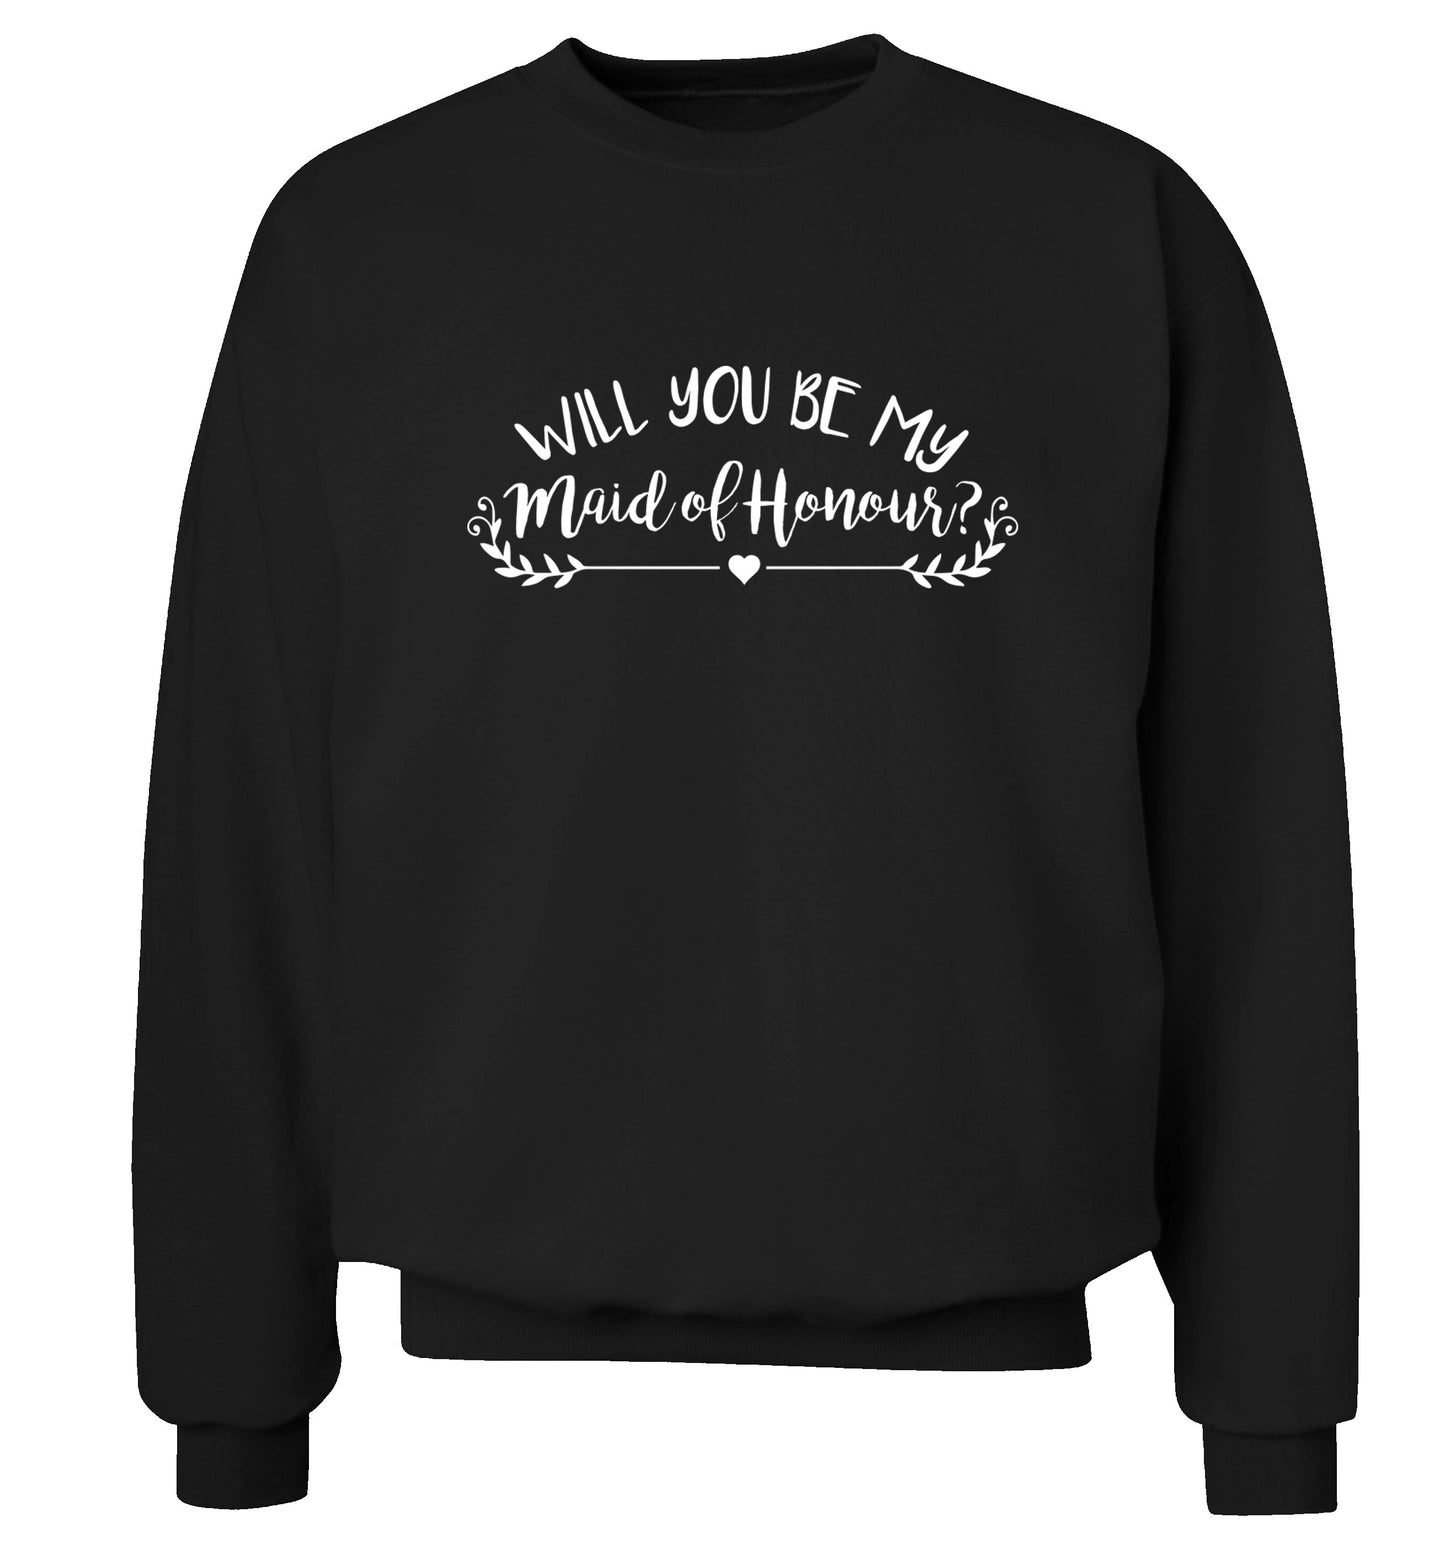 Will you be my maid of honour? Adult's unisex black Sweater 2XL